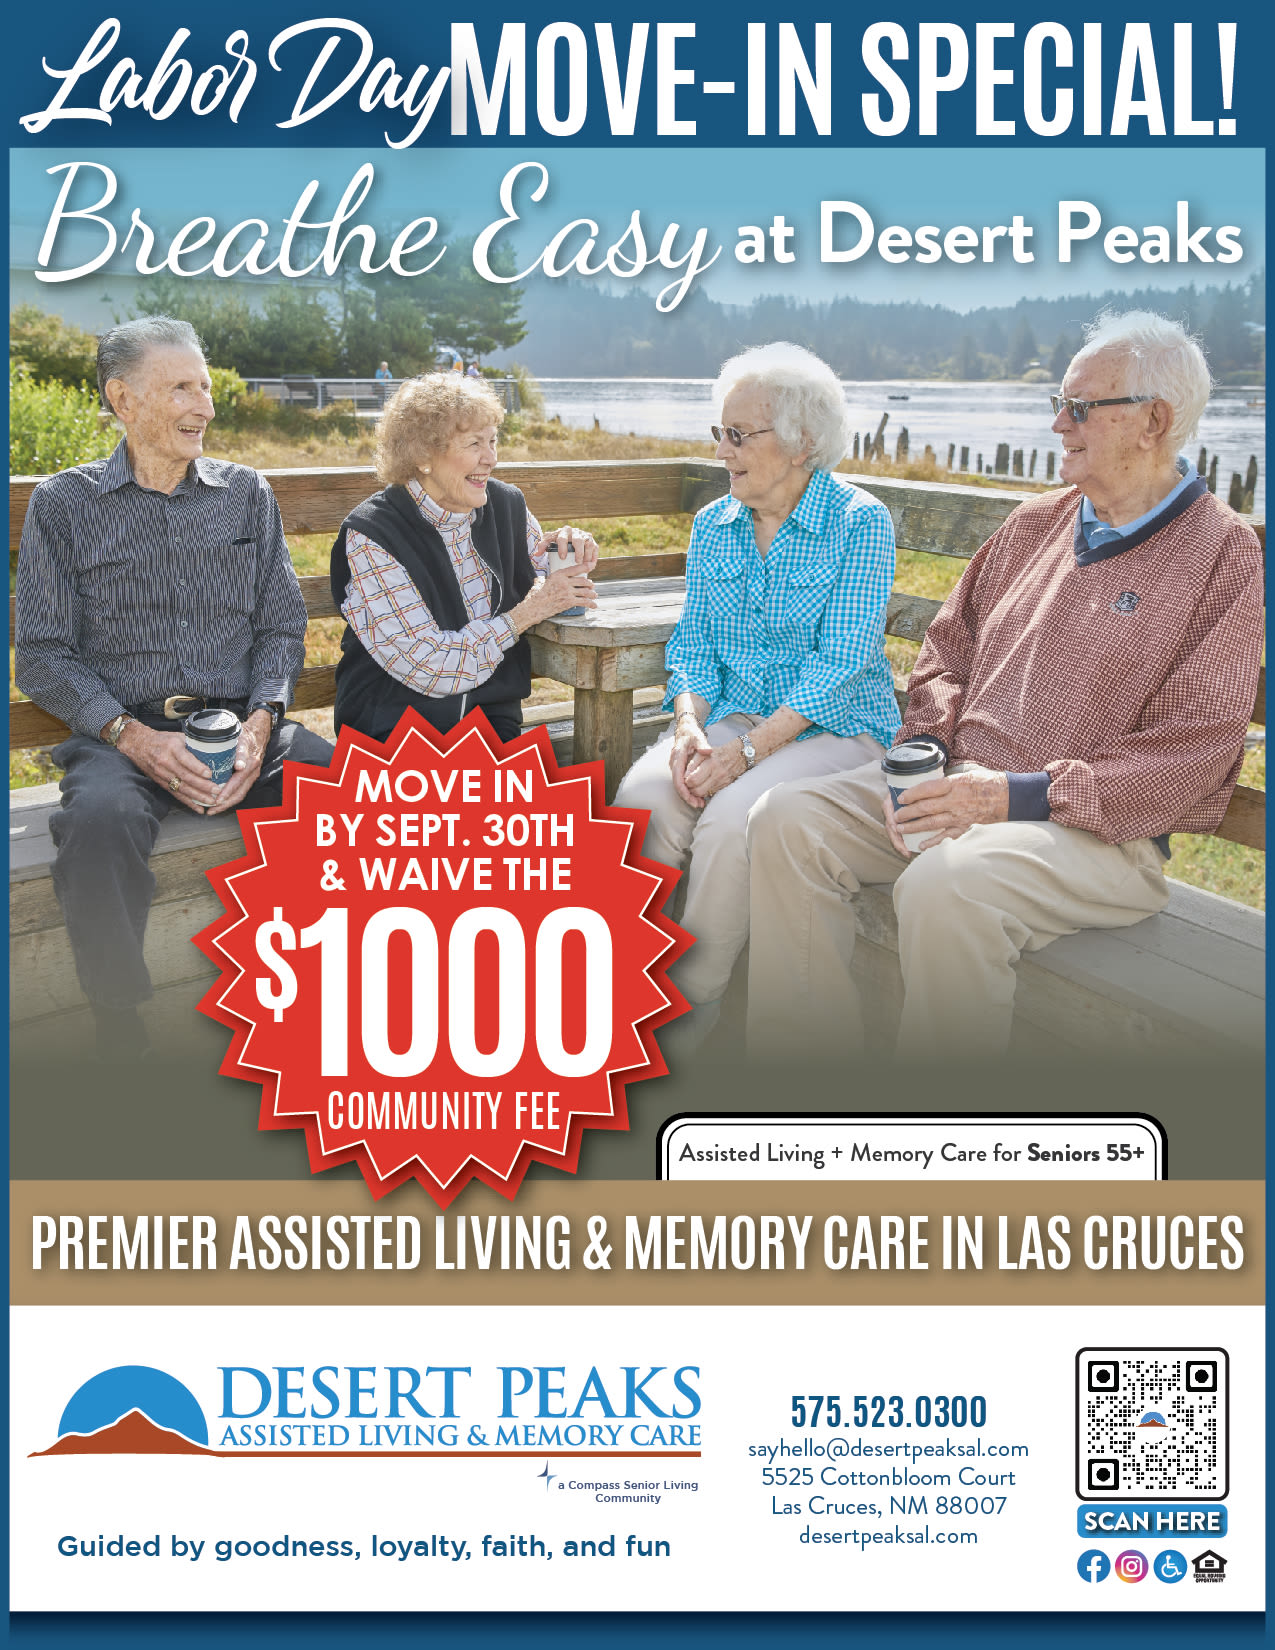 Specials flyer at Desert Peaks Assisted Living and Memory Care in Las Cruces, New Mexico